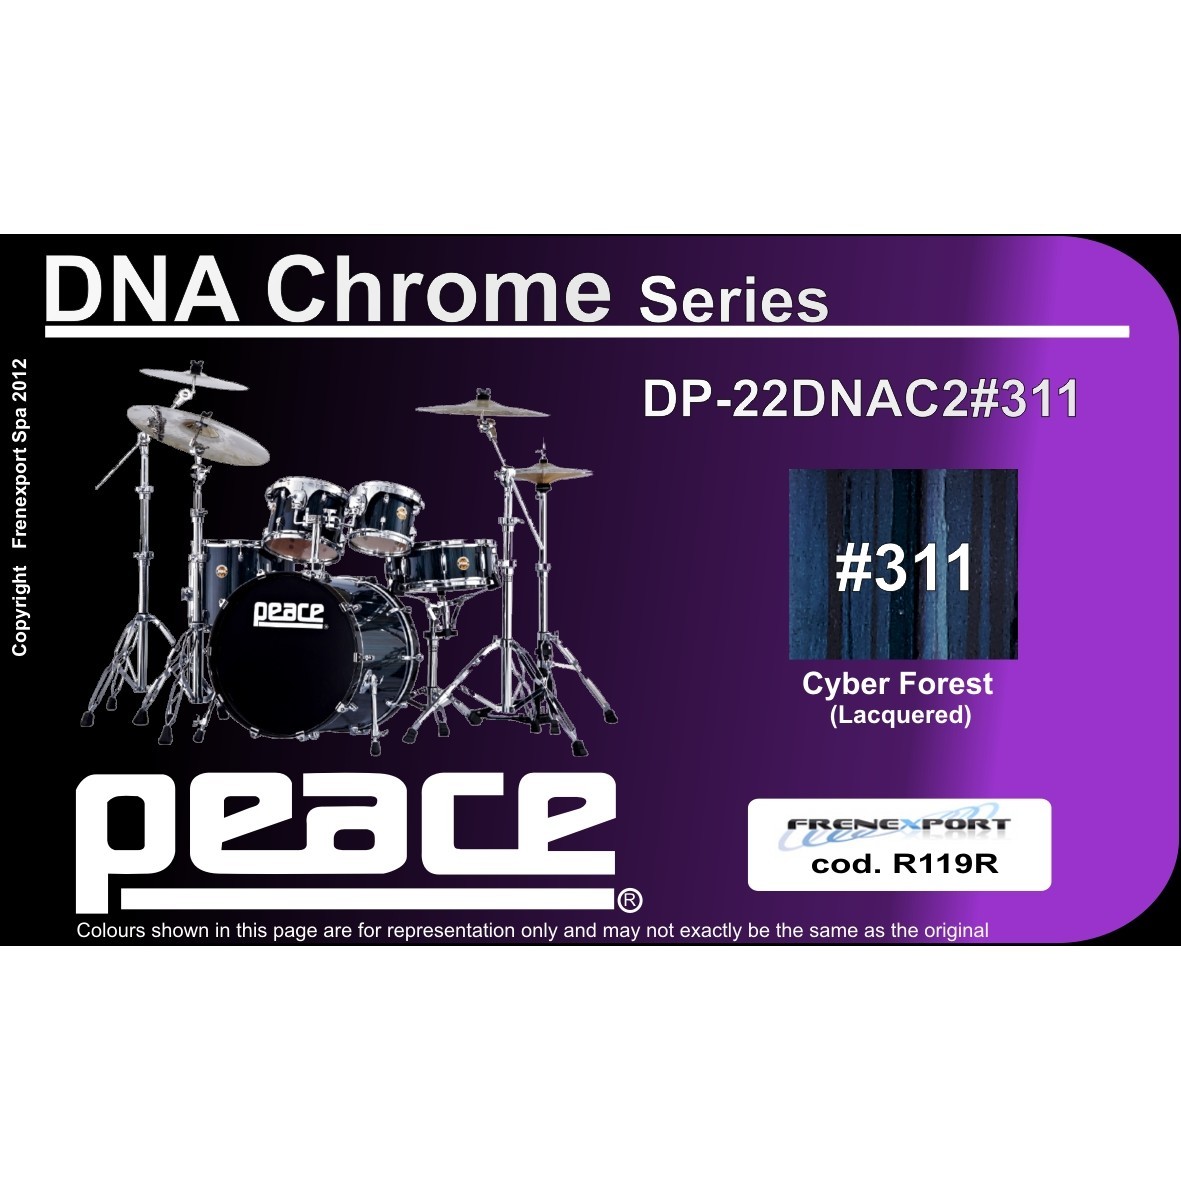 BATTERIA PEACE DNA DP-22DNAC2 #311 CYBER FOREST_2